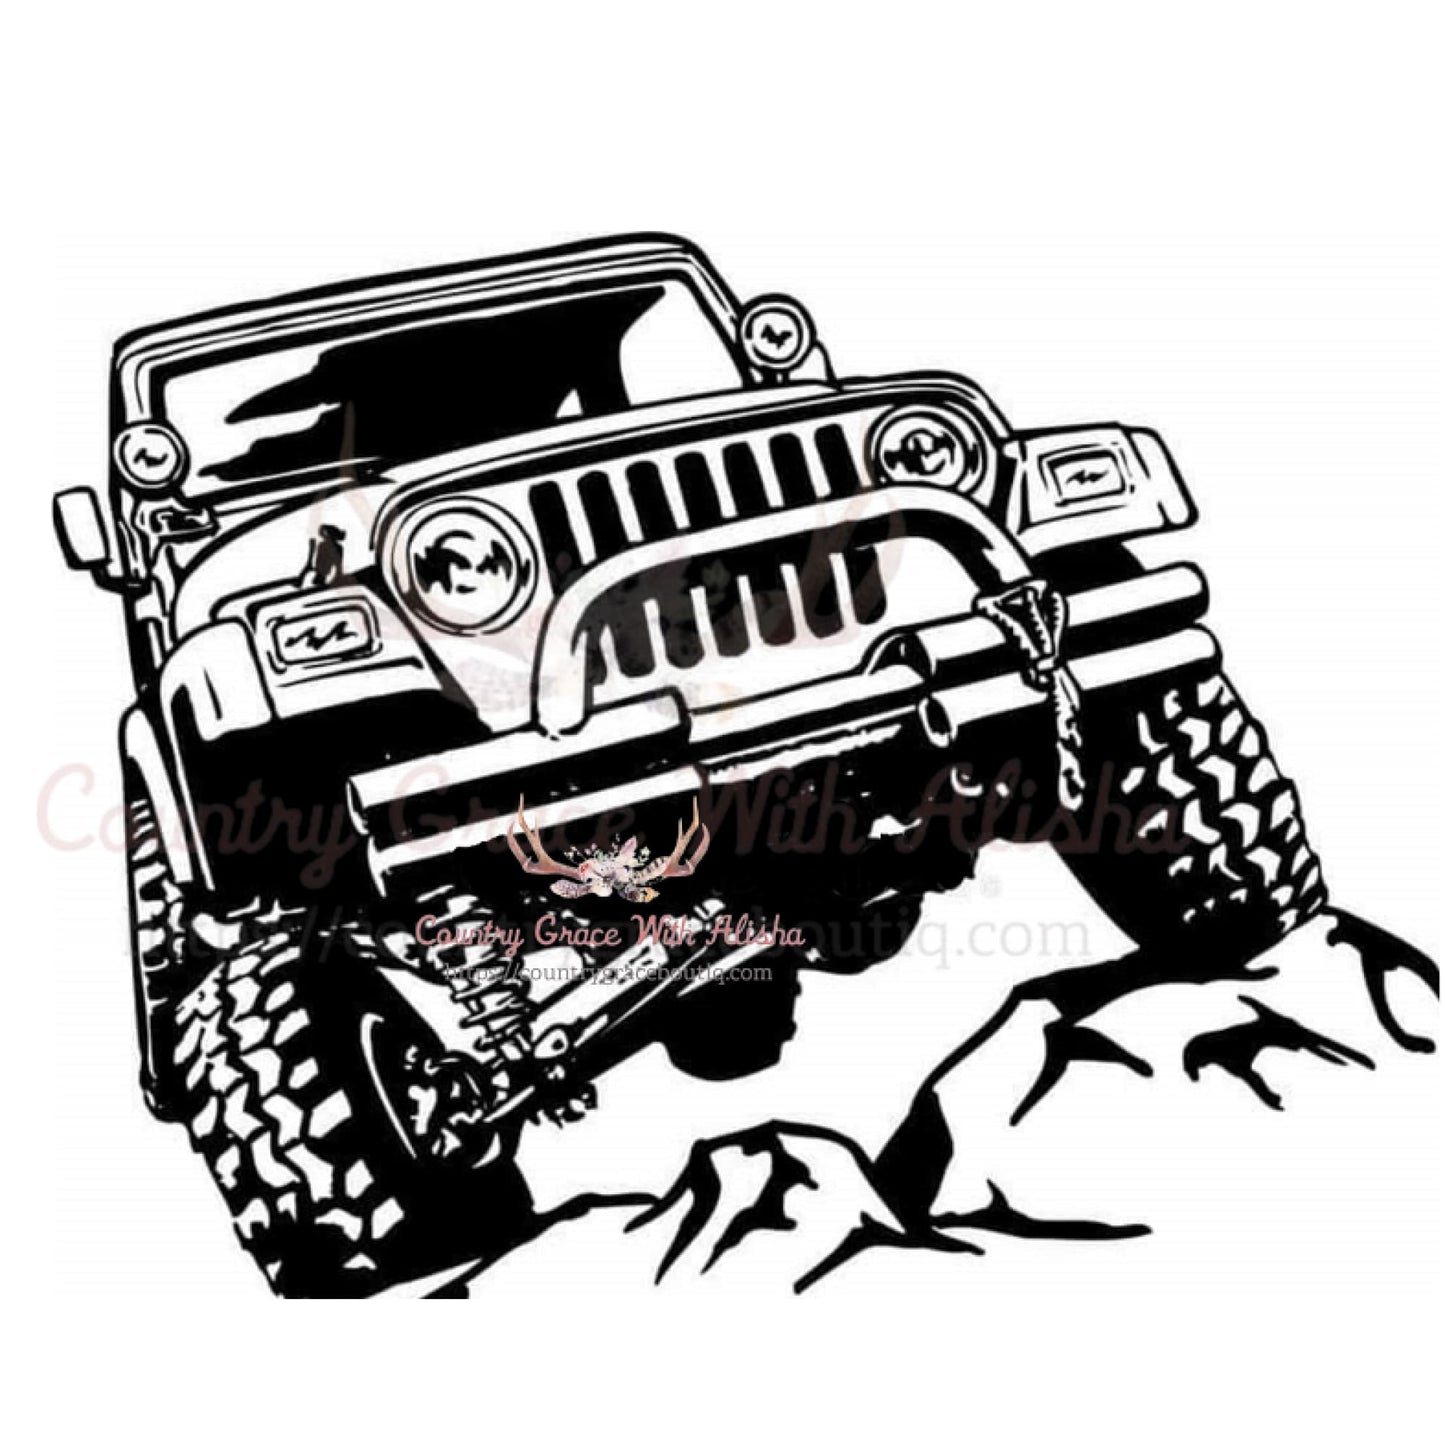 Climbing Jeep Sublimation Transfer - Sub $1.50 Country Grace